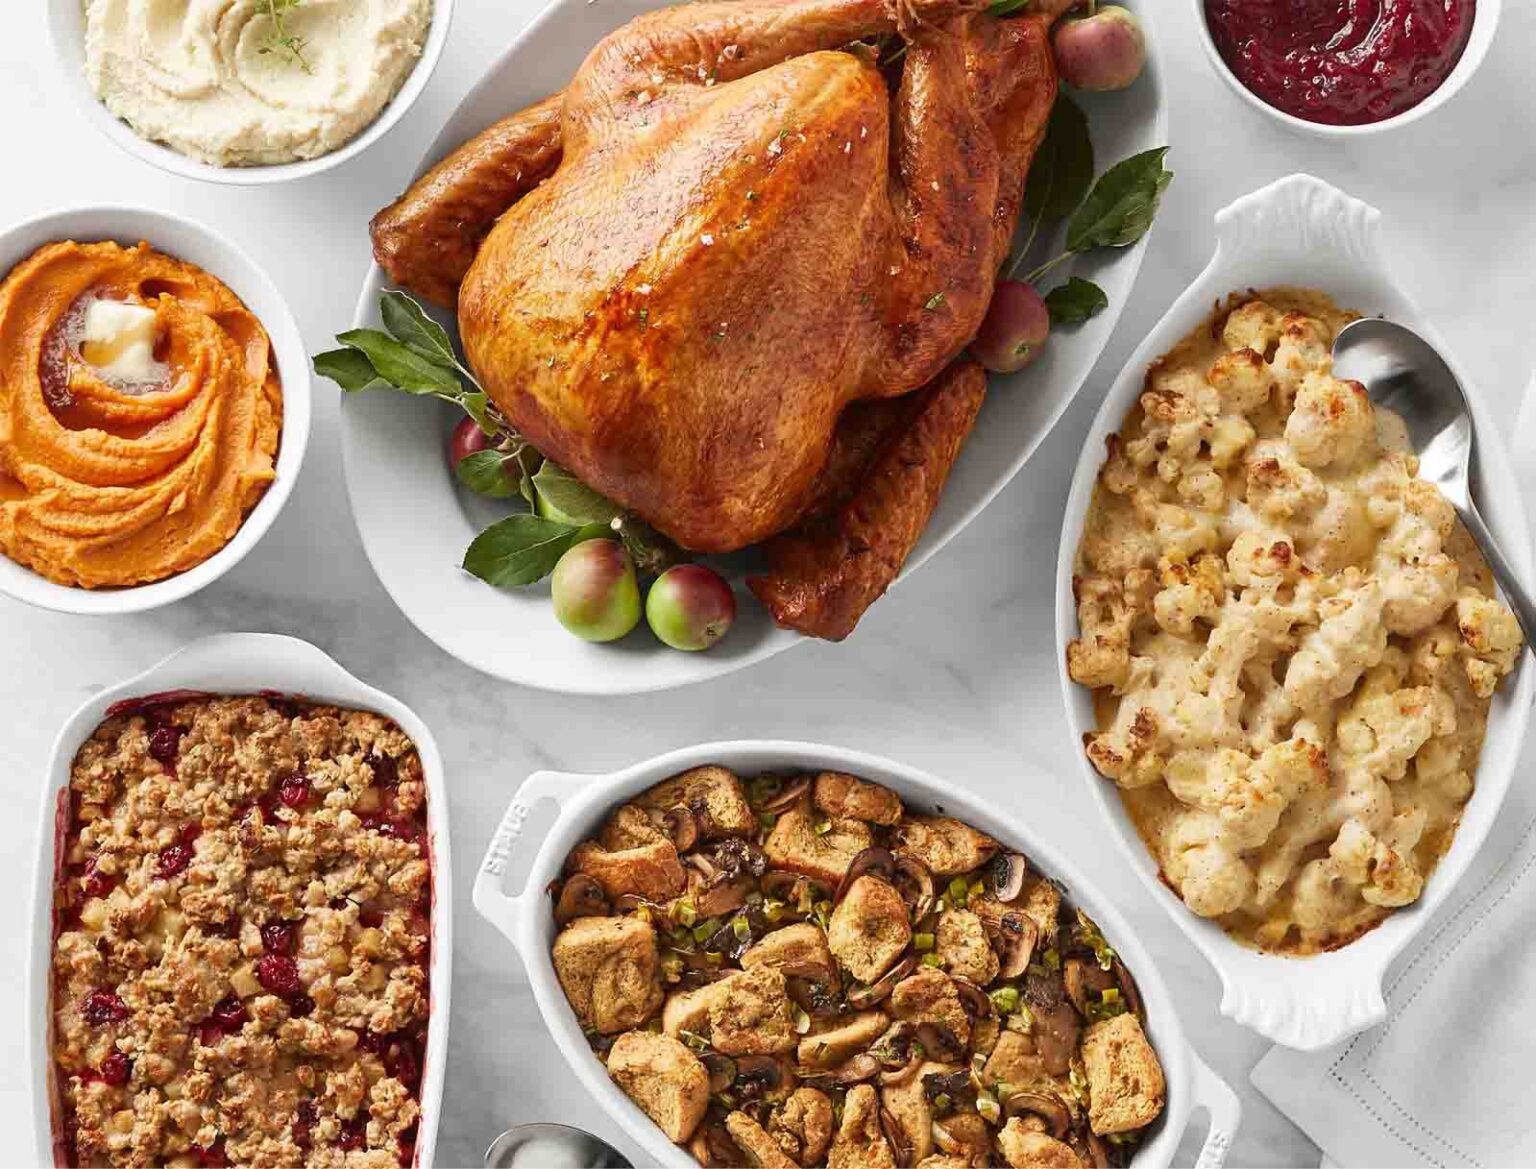 If you’re worried you can't afford a traditional Thanksgiving dinner this year, Walmart could be your saving grace. Here's how it works.